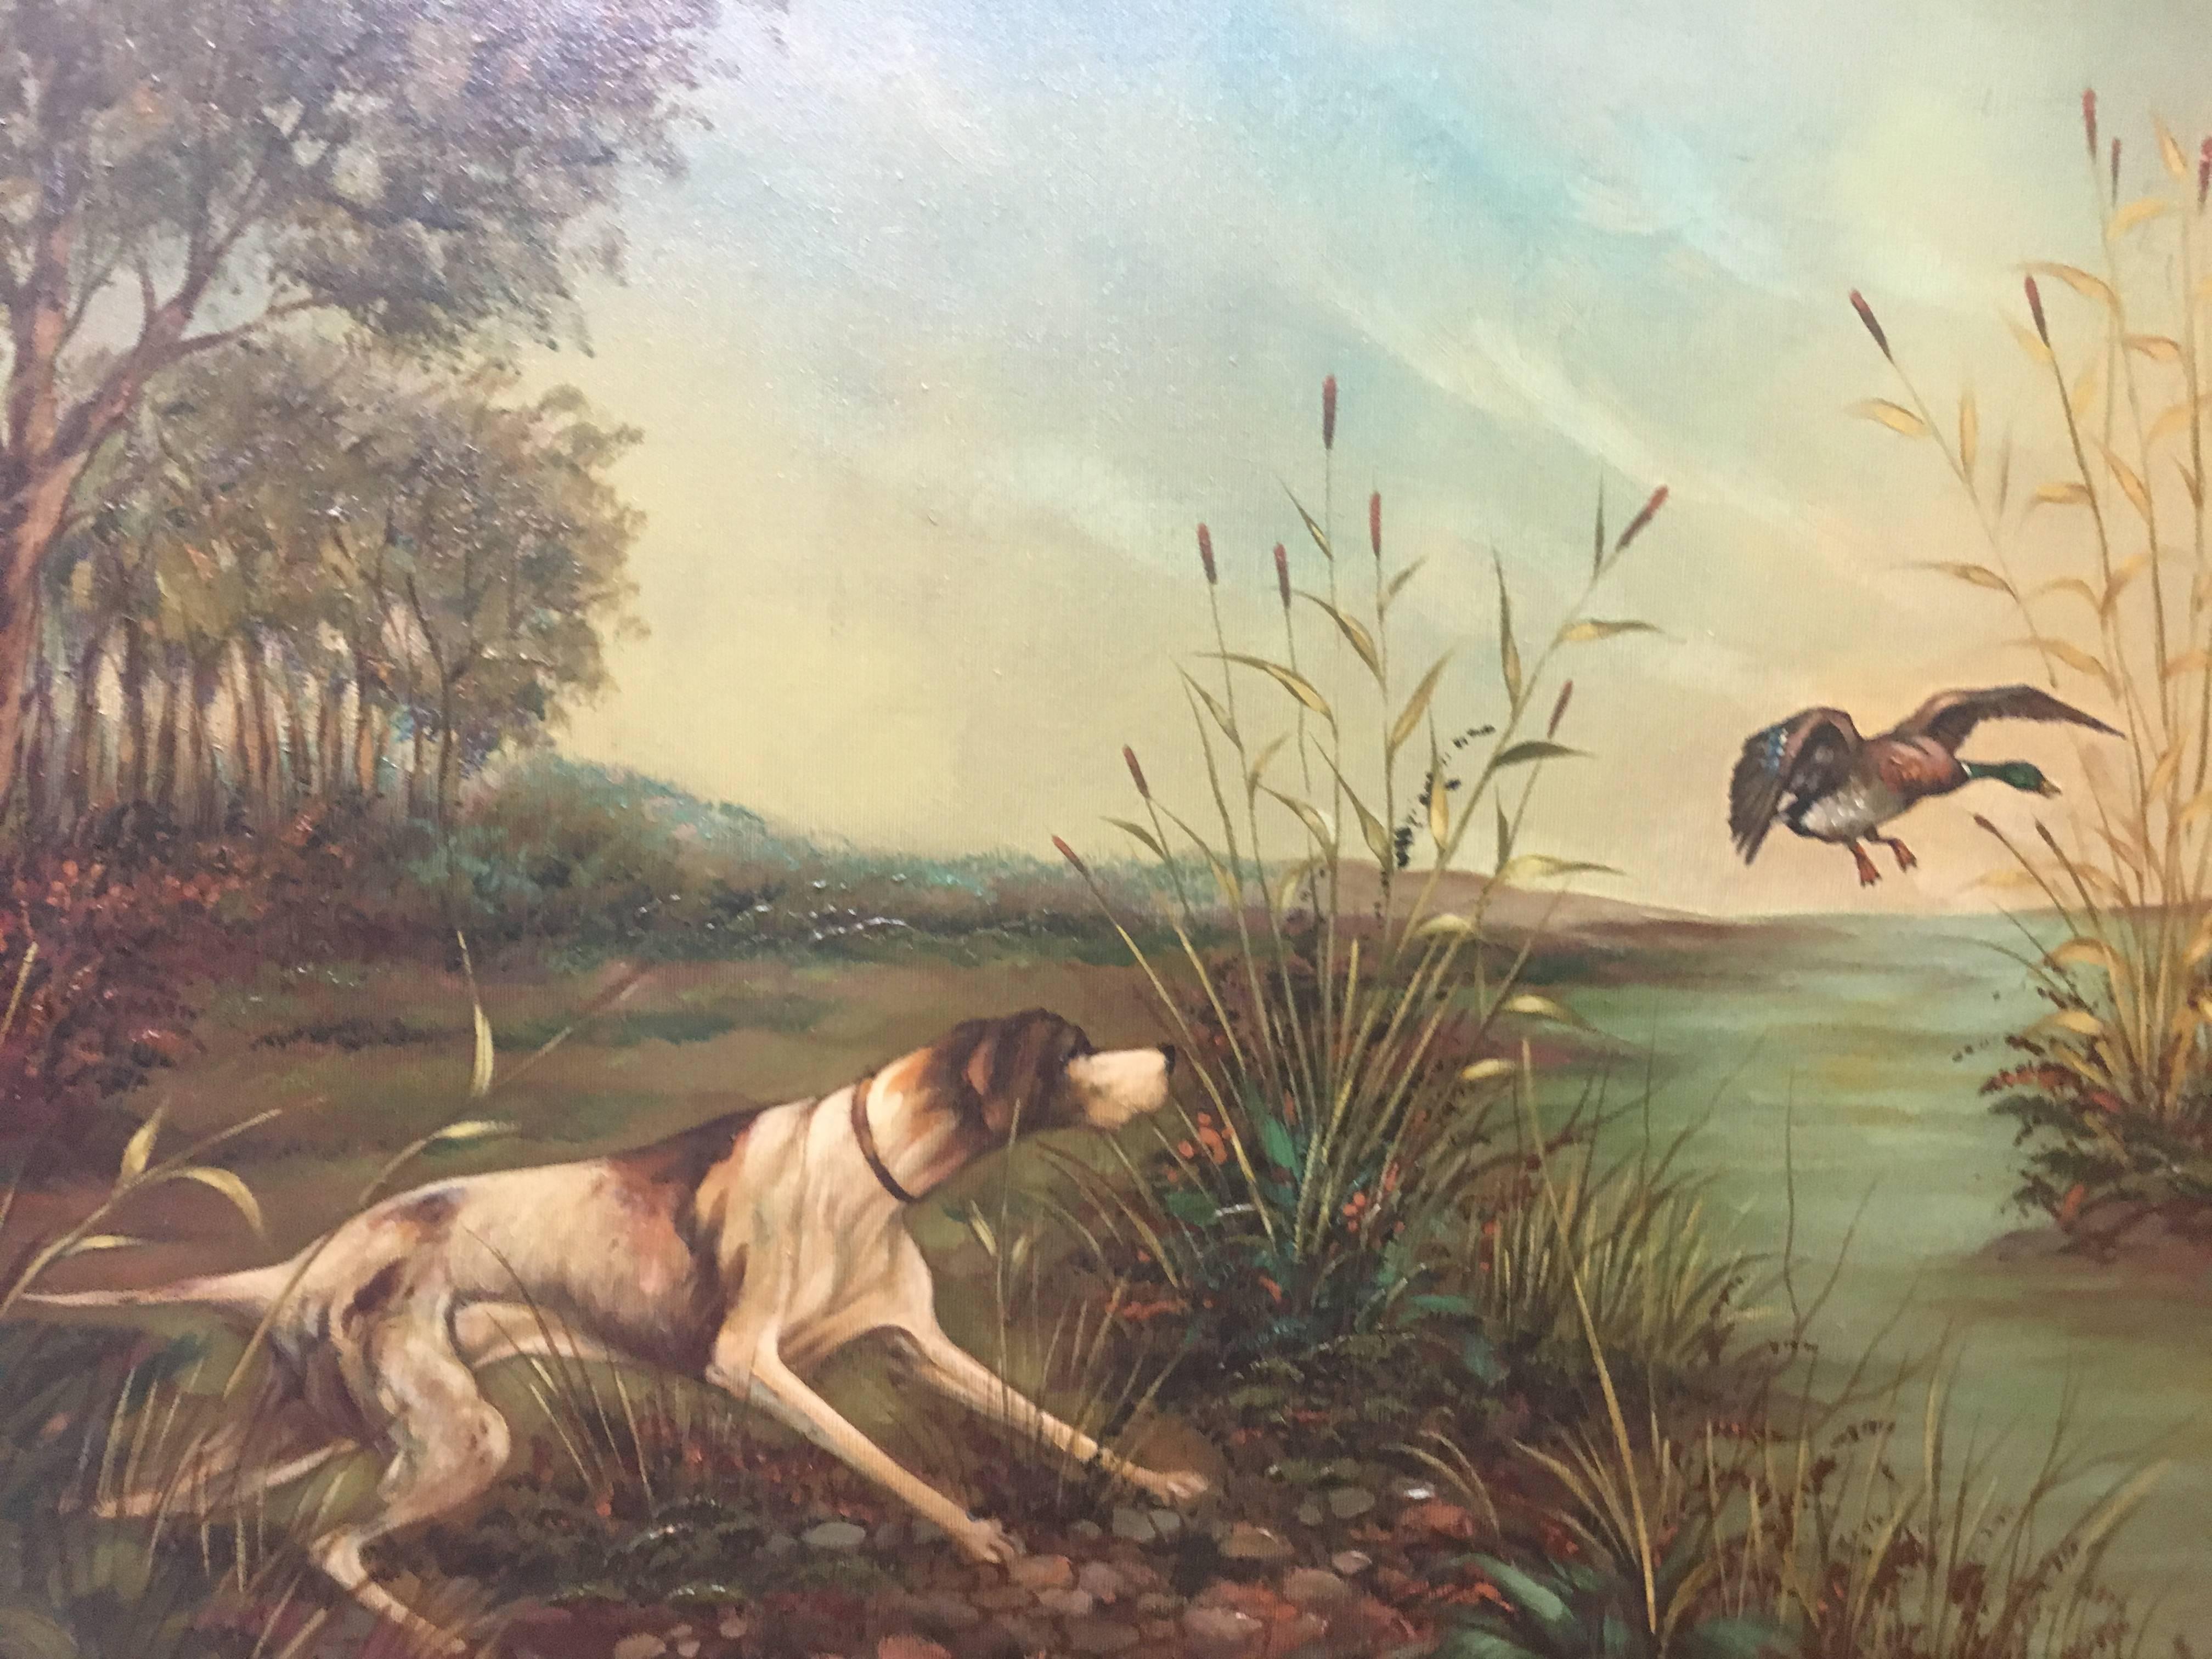 Oil painting by the Spanish painter Juan LARA
Recreates a hunting action.